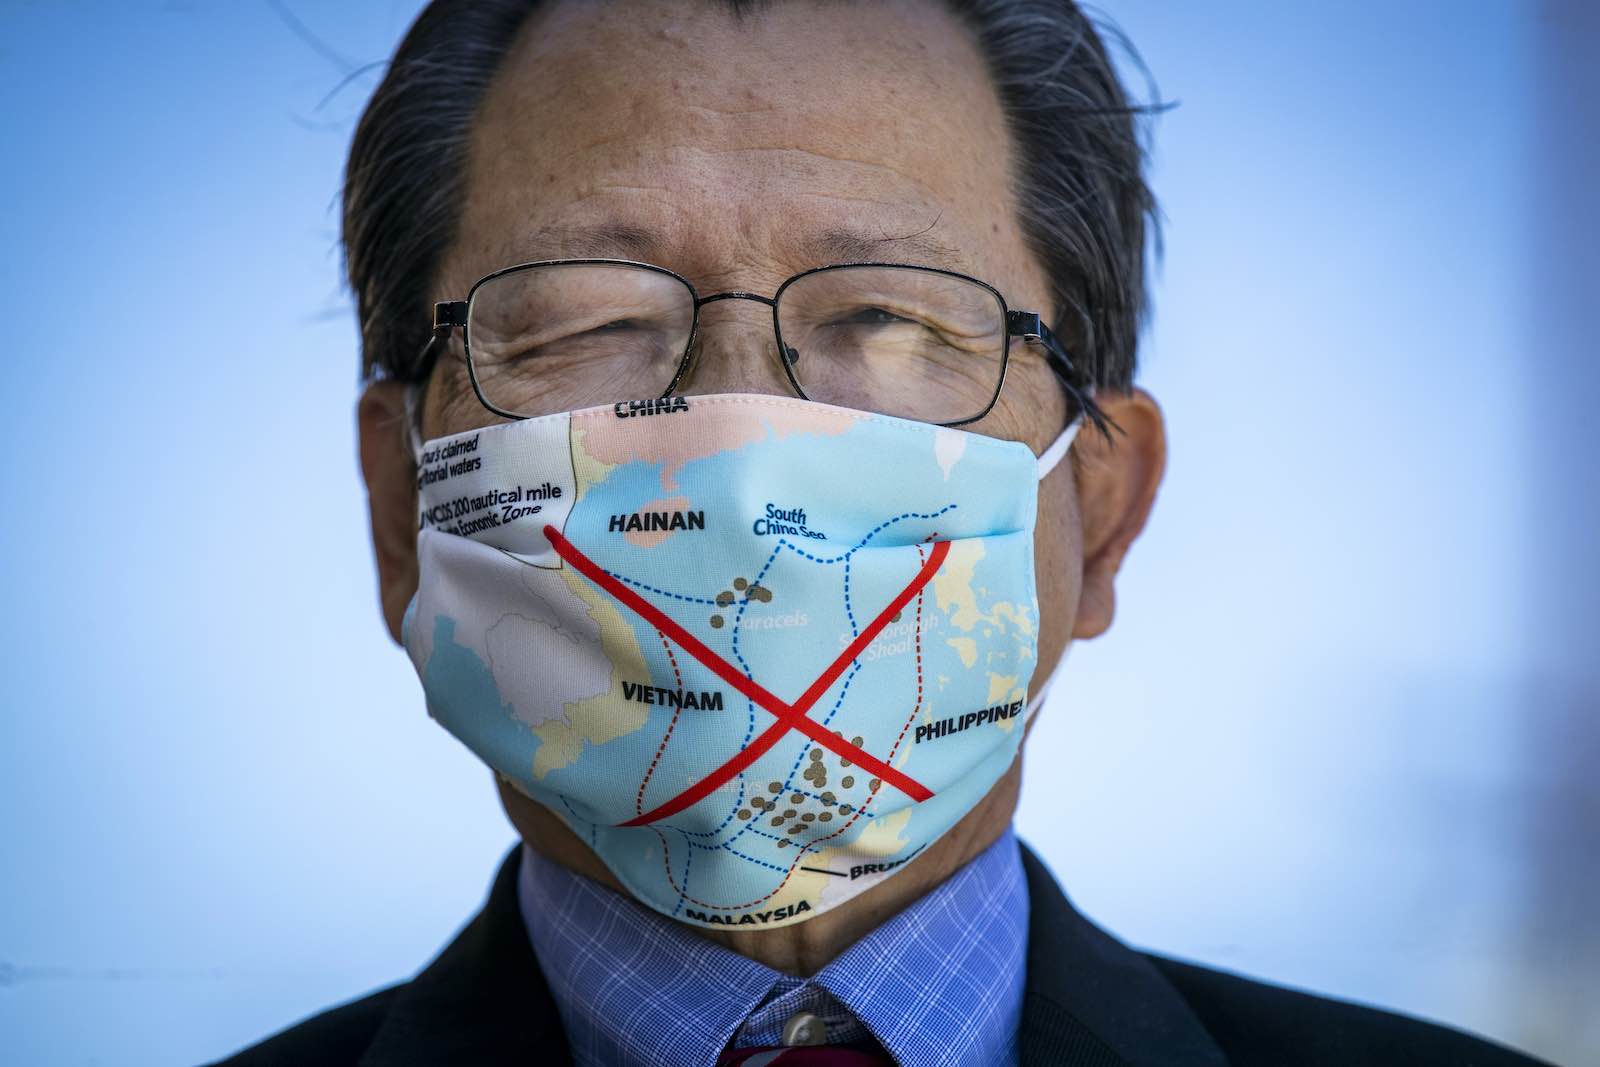 Making a statement on the South China Sea dispute in the Covid-19 era (Allen J. Schaben/LA Times via Getty Images)